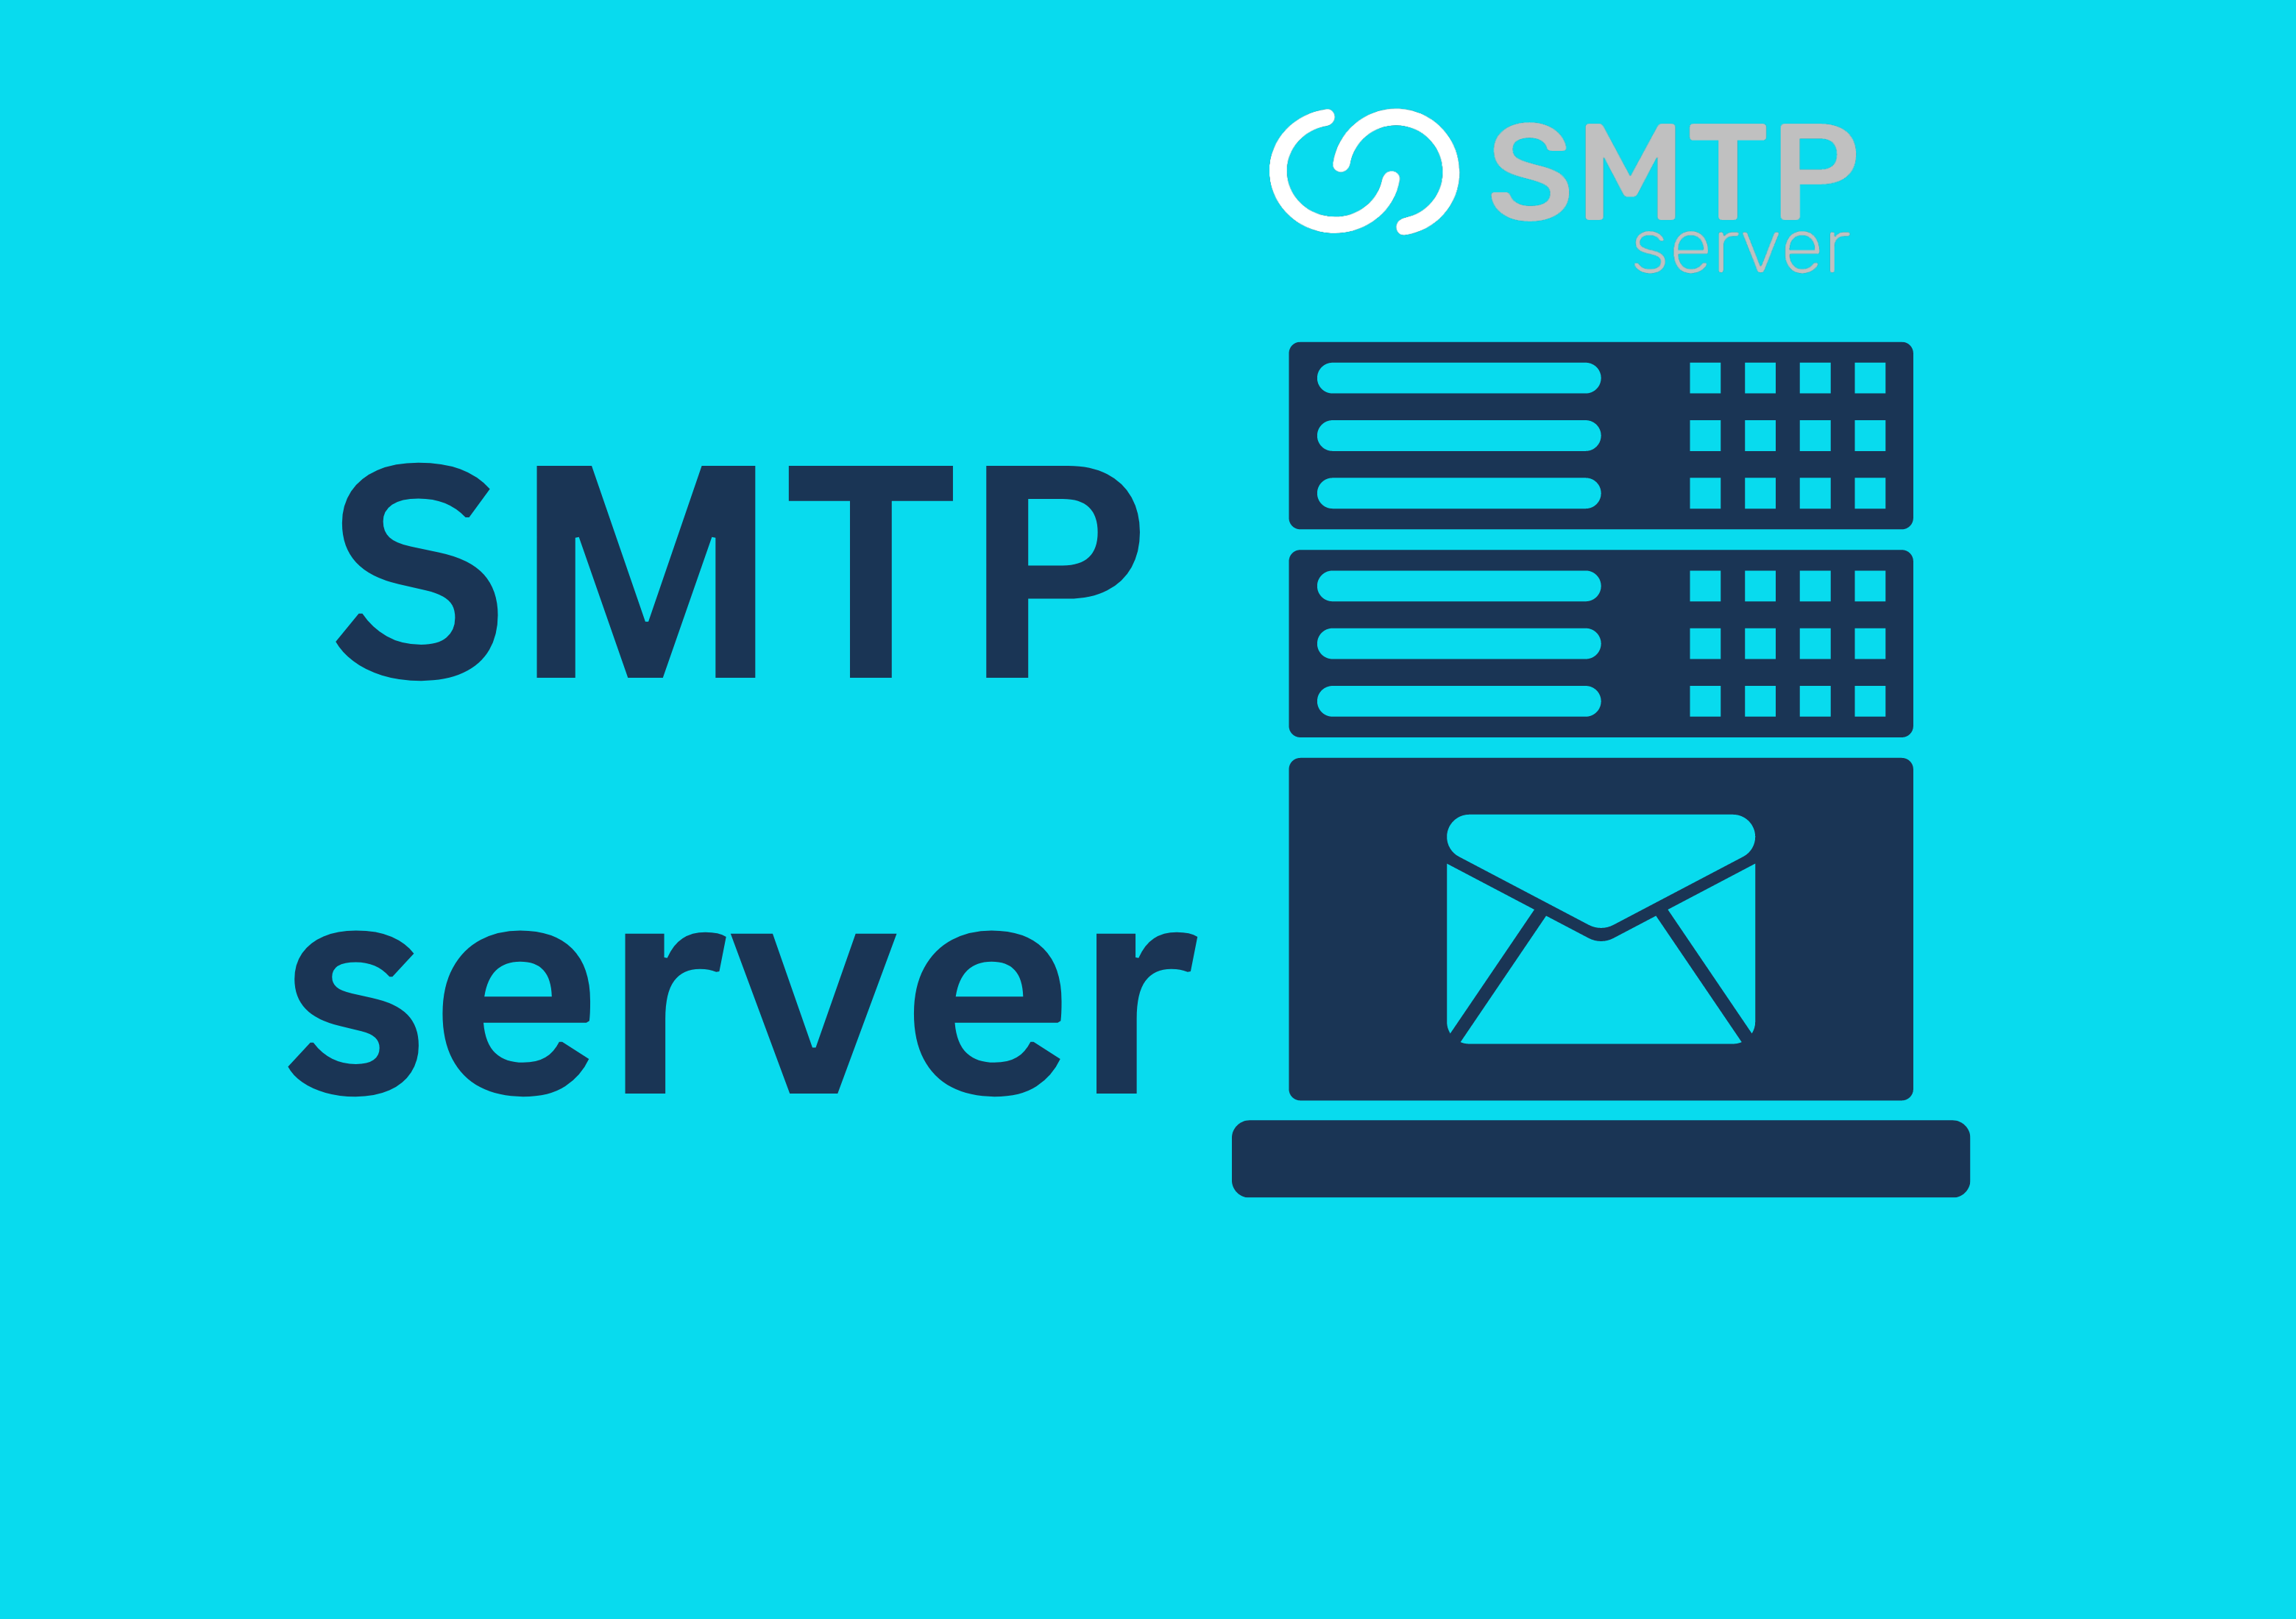 SMTP server: What is this and it’s definition